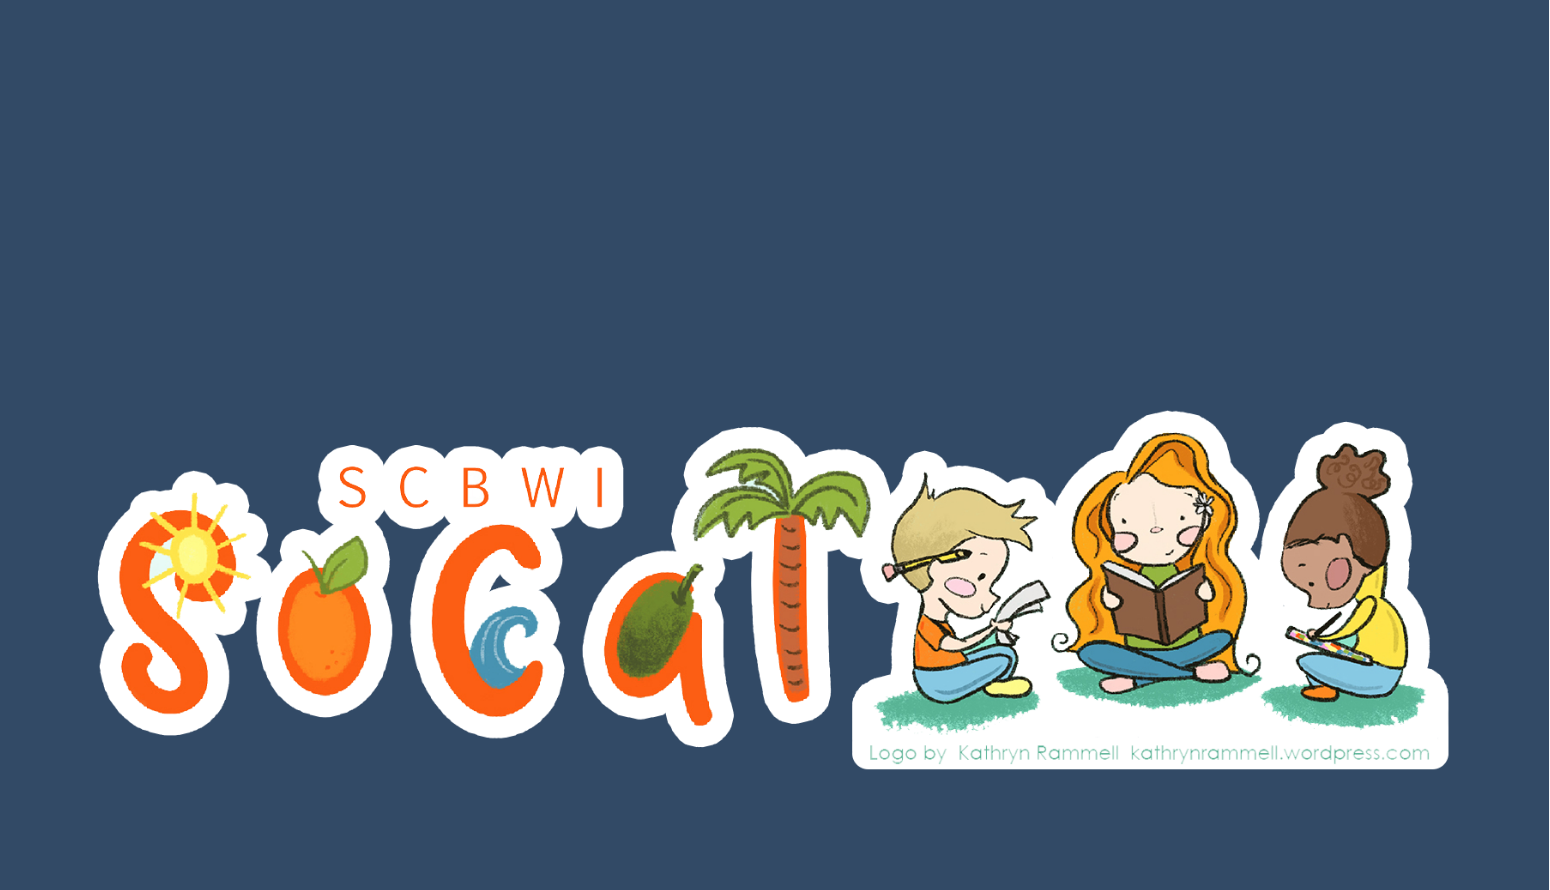 SCBWI logo.png